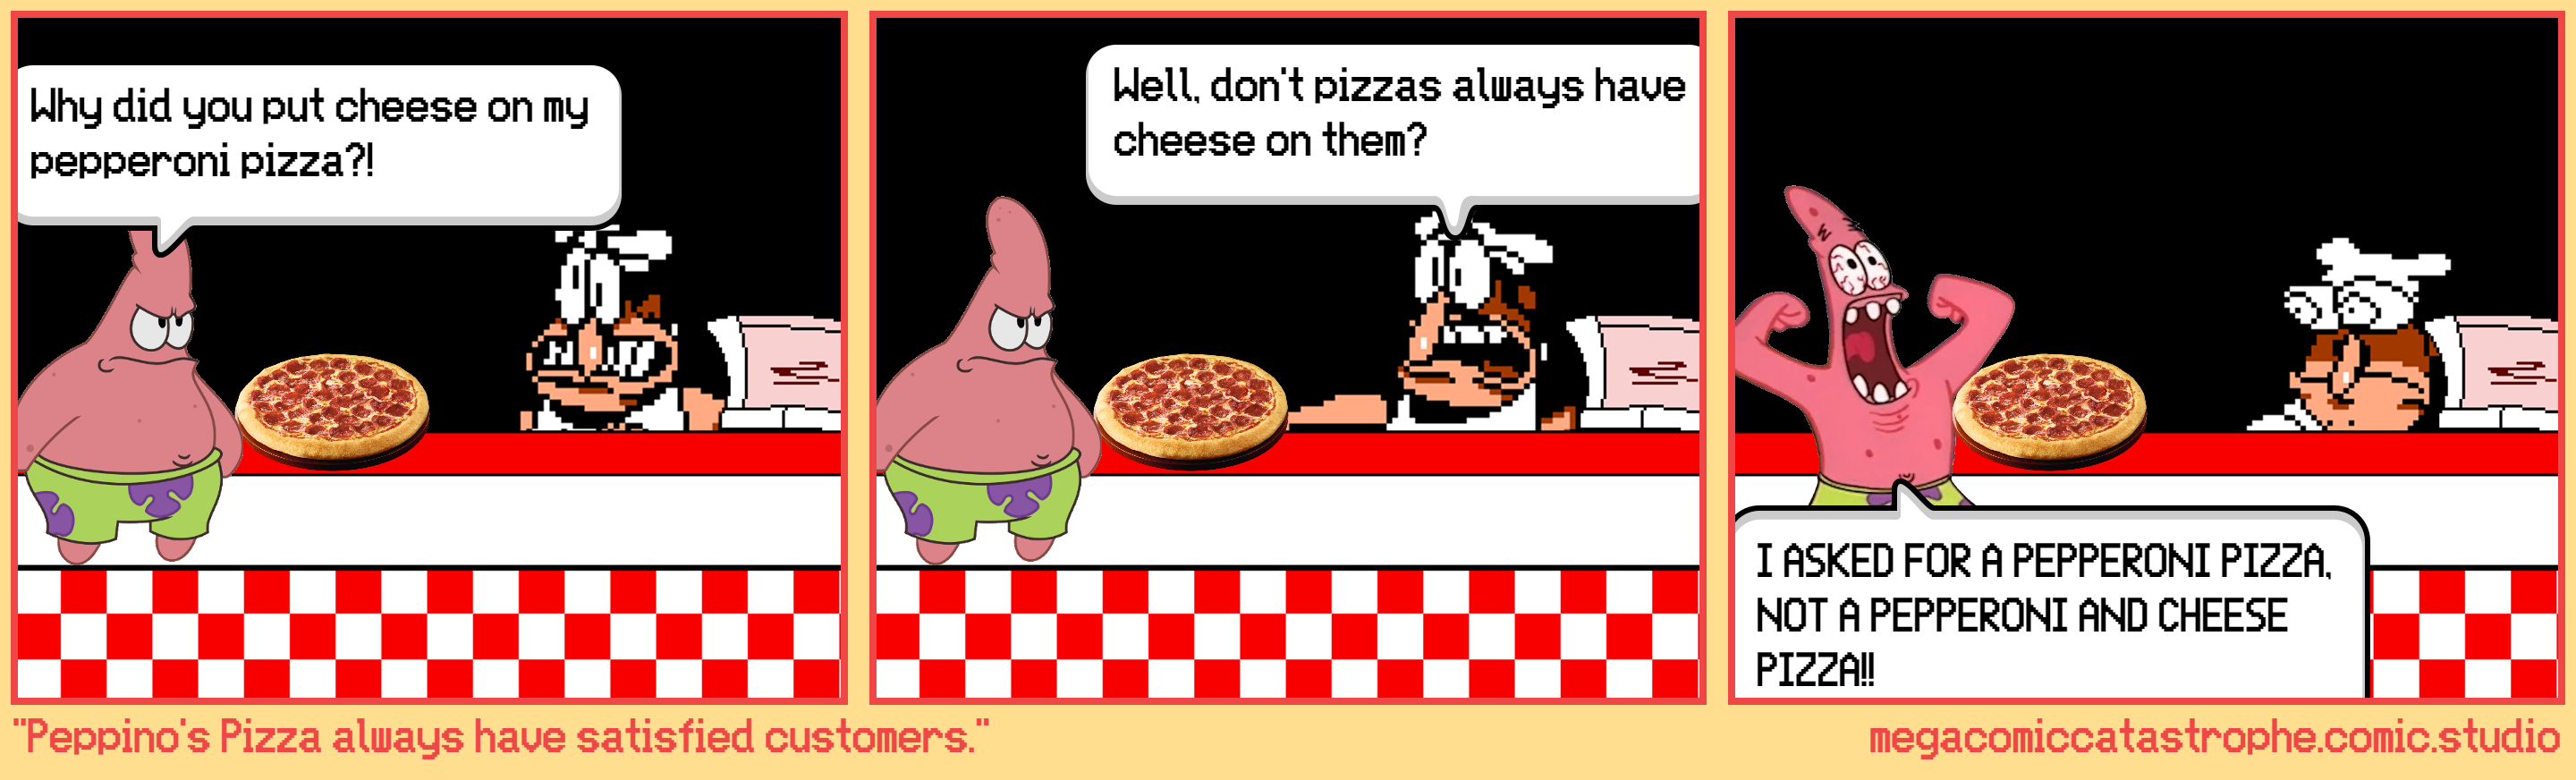 "Peppino's Pizza always have satisfied customers."